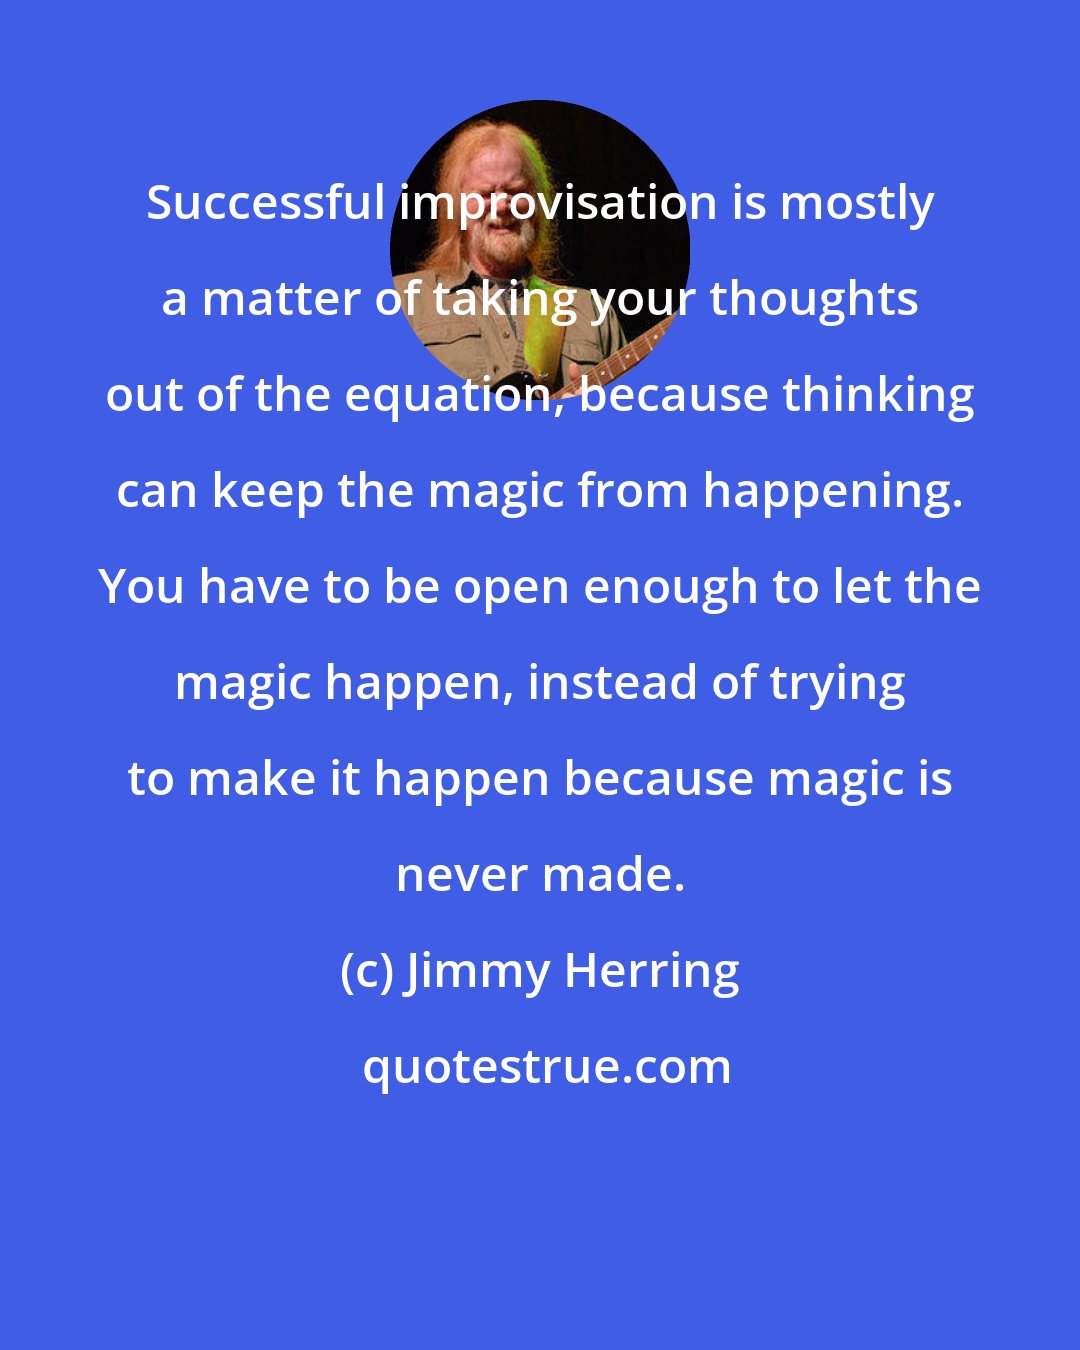 Jimmy Herring: Successful improvisation is mostly a matter of taking your thoughts out of the equation, because thinking can keep the magic from happening. You have to be open enough to let the magic happen, instead of trying to make it happen because magic is never made.